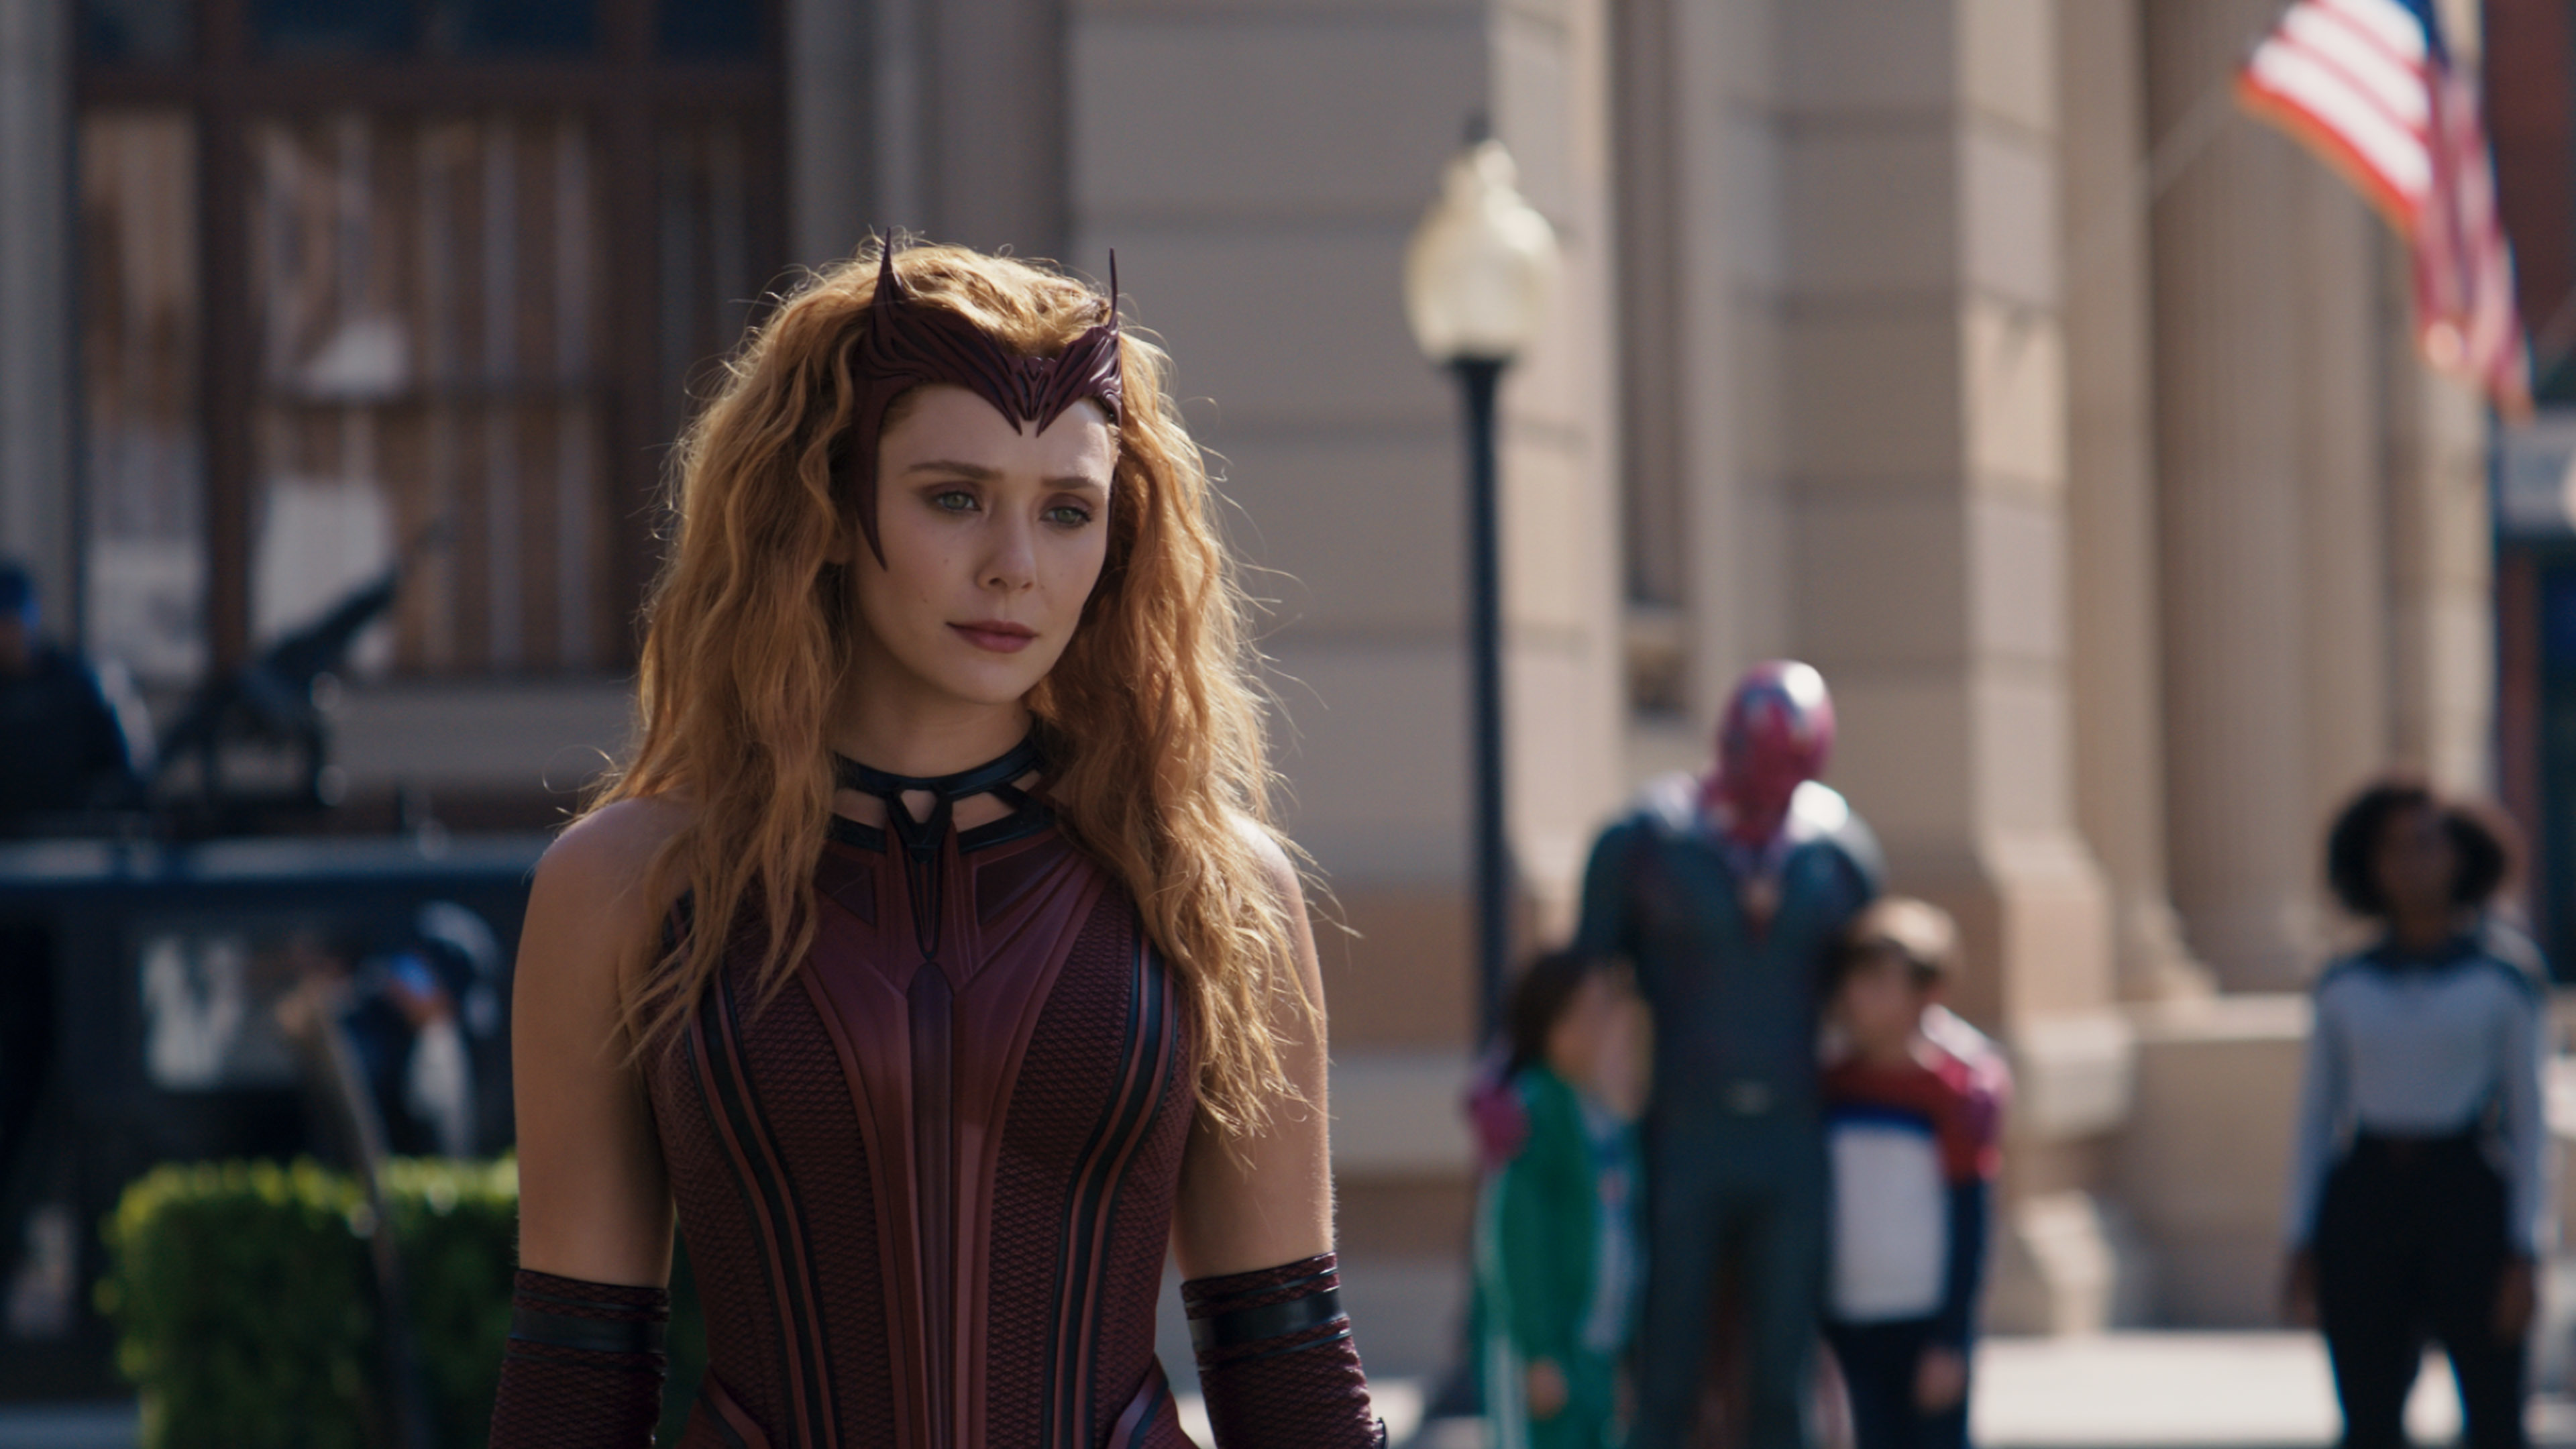 Elizabeth Olsen as Wanda Maximoff in the 'WandaVision' finale. She's wearing her Scarlet Witch costume, and Vision and their twins are standing in the background.